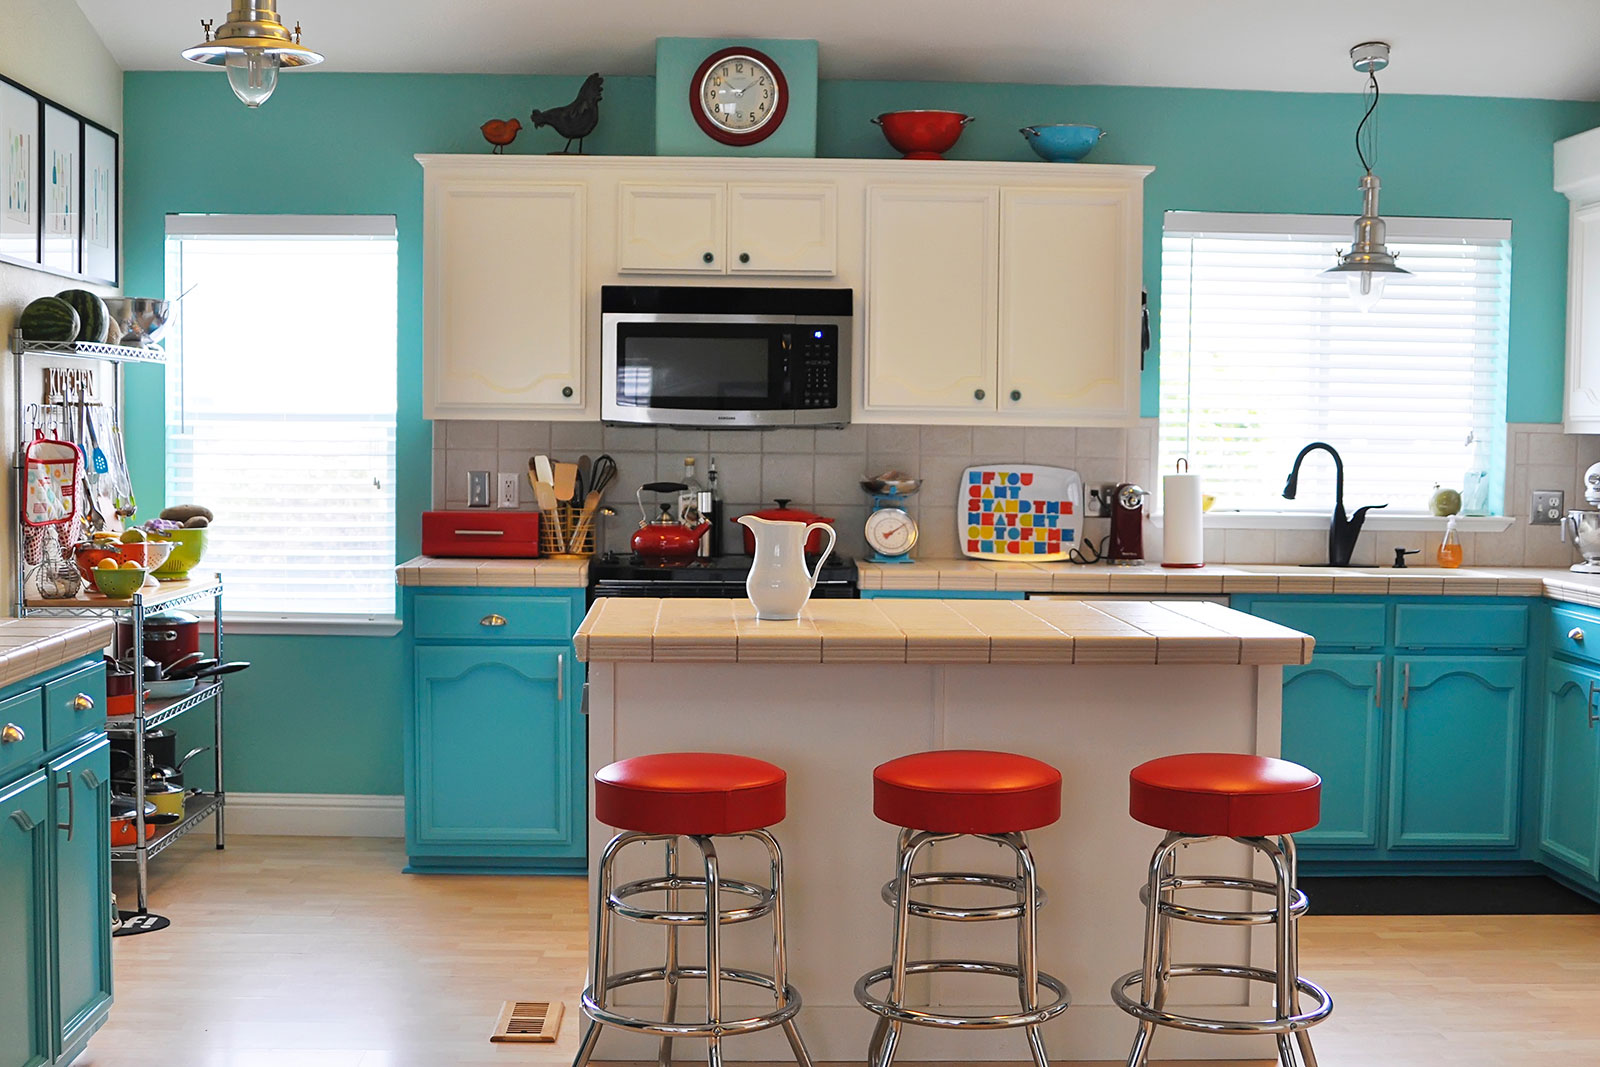 kitchen work triangle red chair colorful